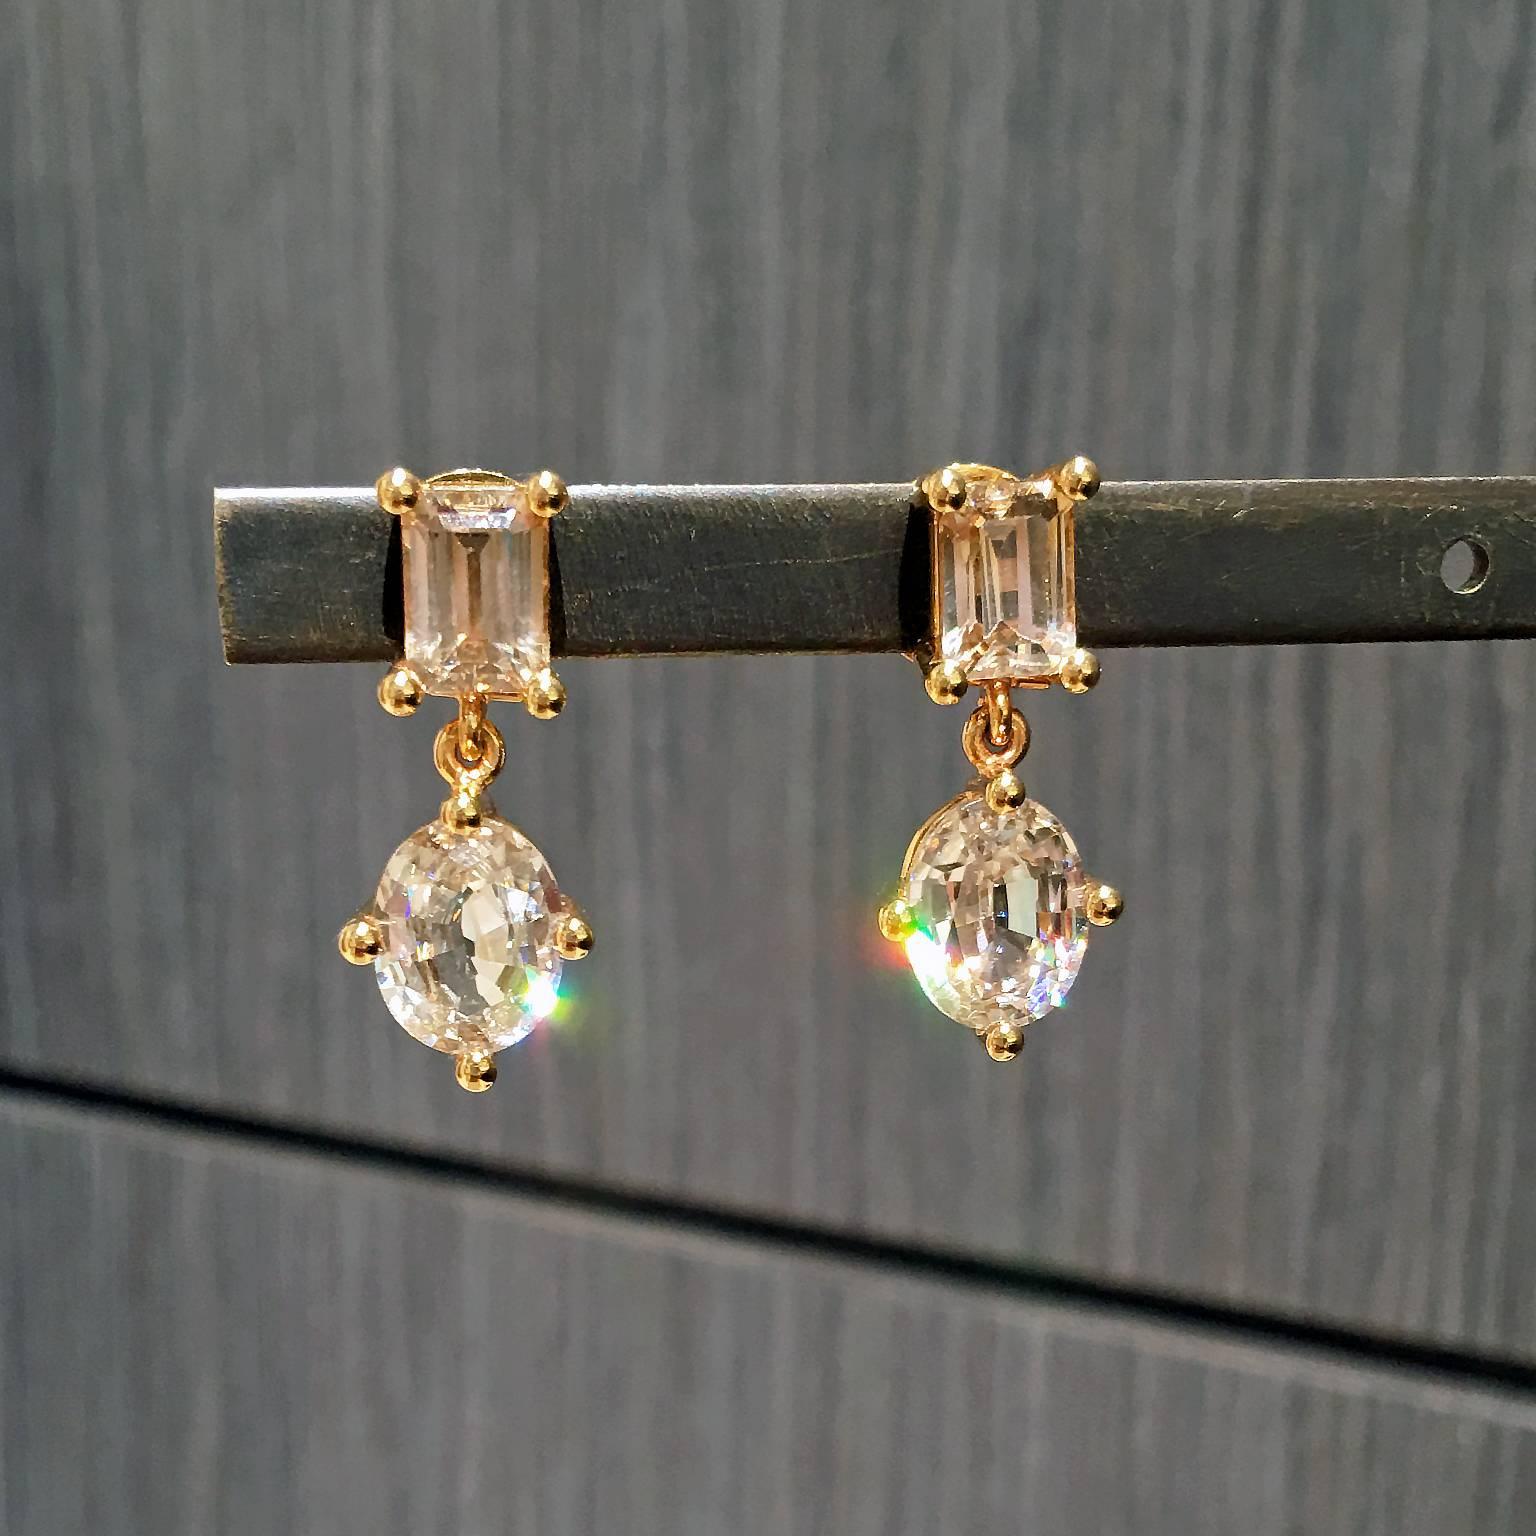 One of a Kind Princess Earrings handcrafted in Idar Oberstein, Germany by renowned master jewelry artist Erich Zimmermann in 18k yellow-toned rose gold showcasing two sets of spectacular, fiery, brilliant-cut natural Tanzanian zircons, one set